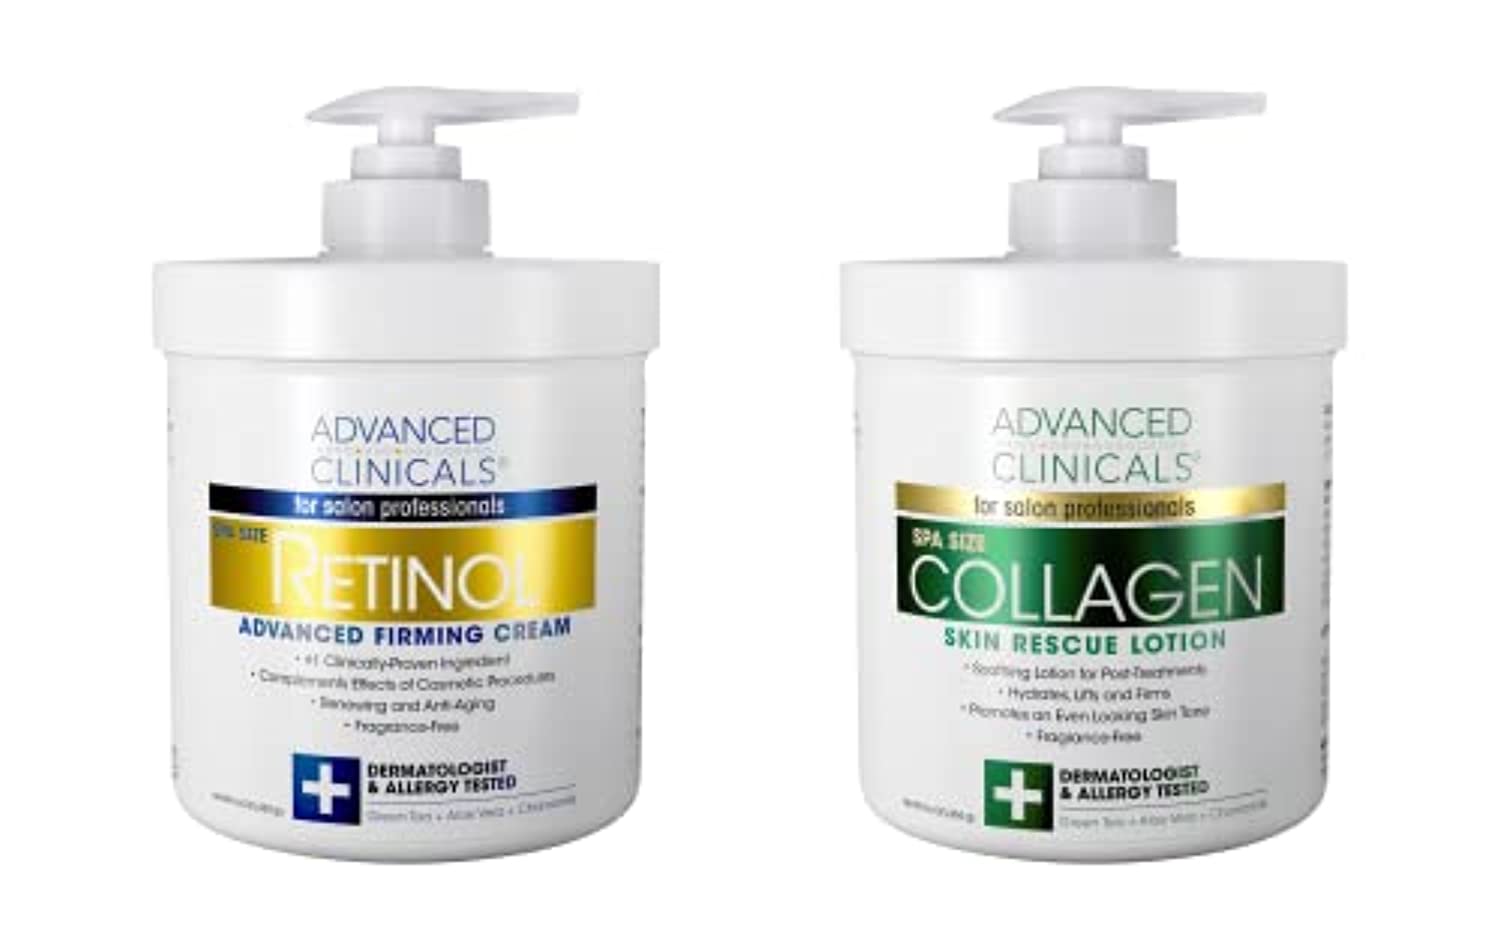 Advanced Clinicals Retinol Cream and Collagen Cream Skin Care set. Value anti-aging set for wrinkles, fine lines, firming skin. 16oz Spa size are great for face cream and body moisturizer.